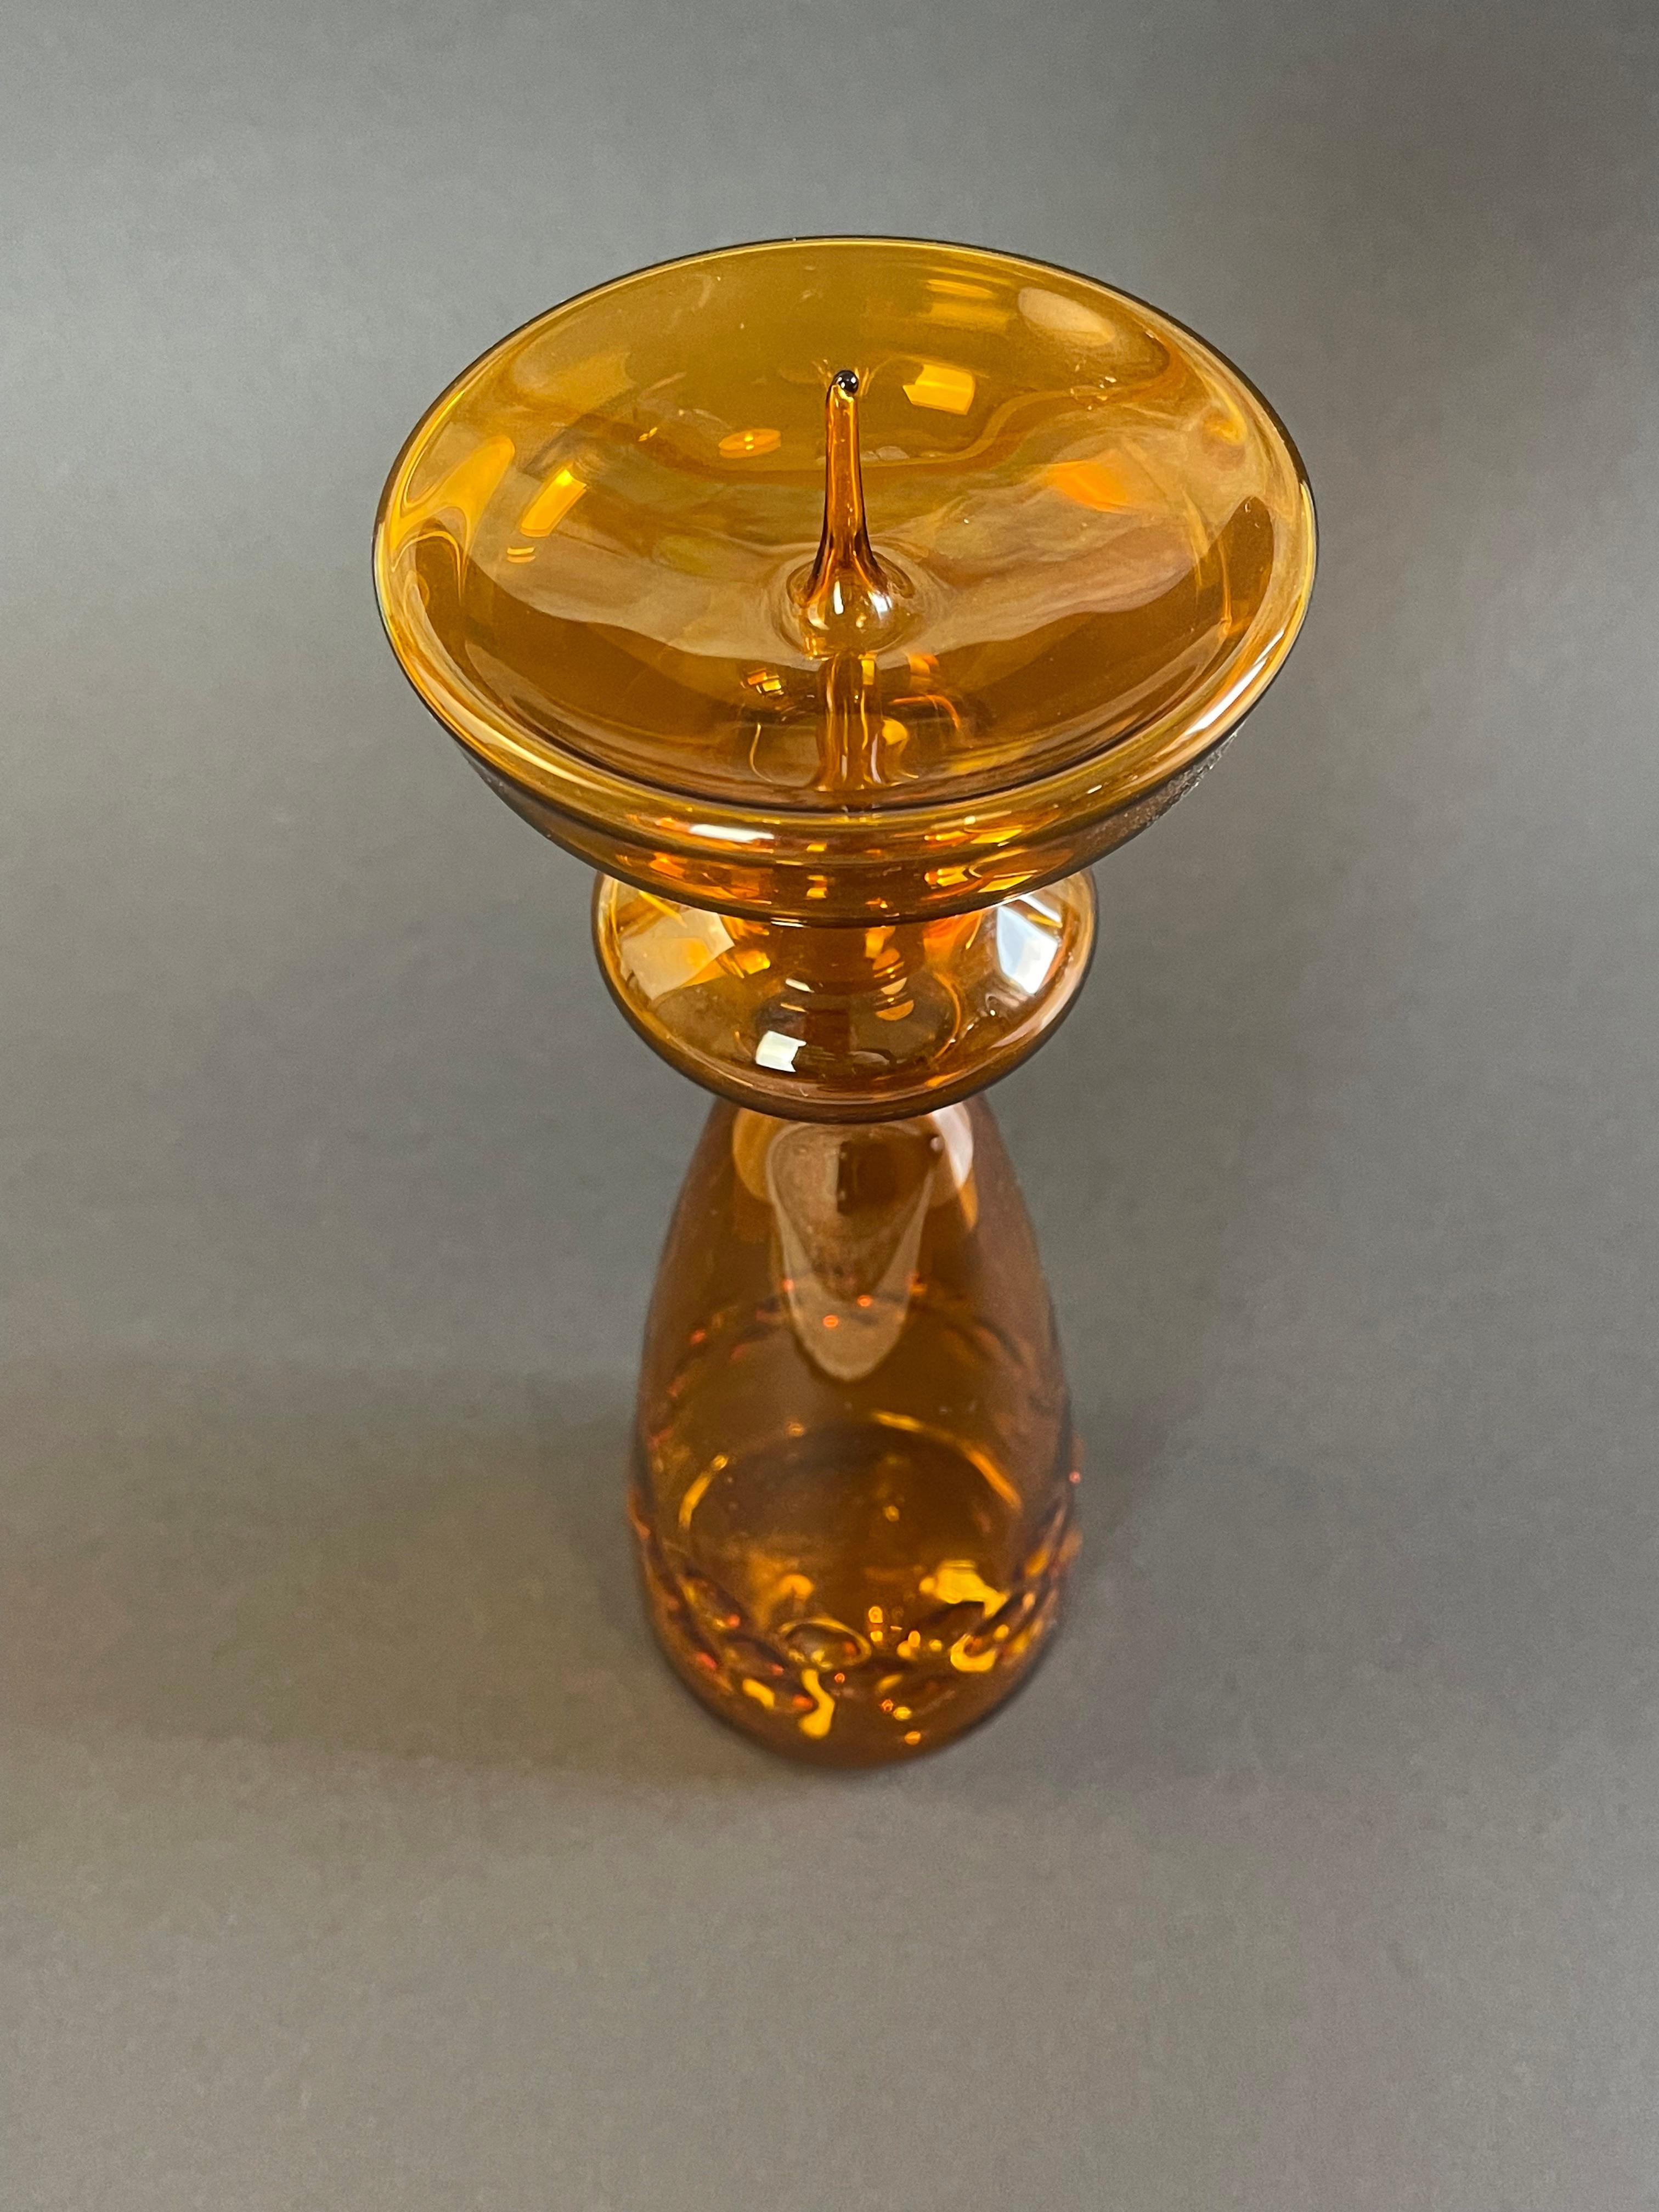 19th Century Mid-Century Amber Art Glass Candlestick by Albin Schaedel 1960s, Eastern Germany